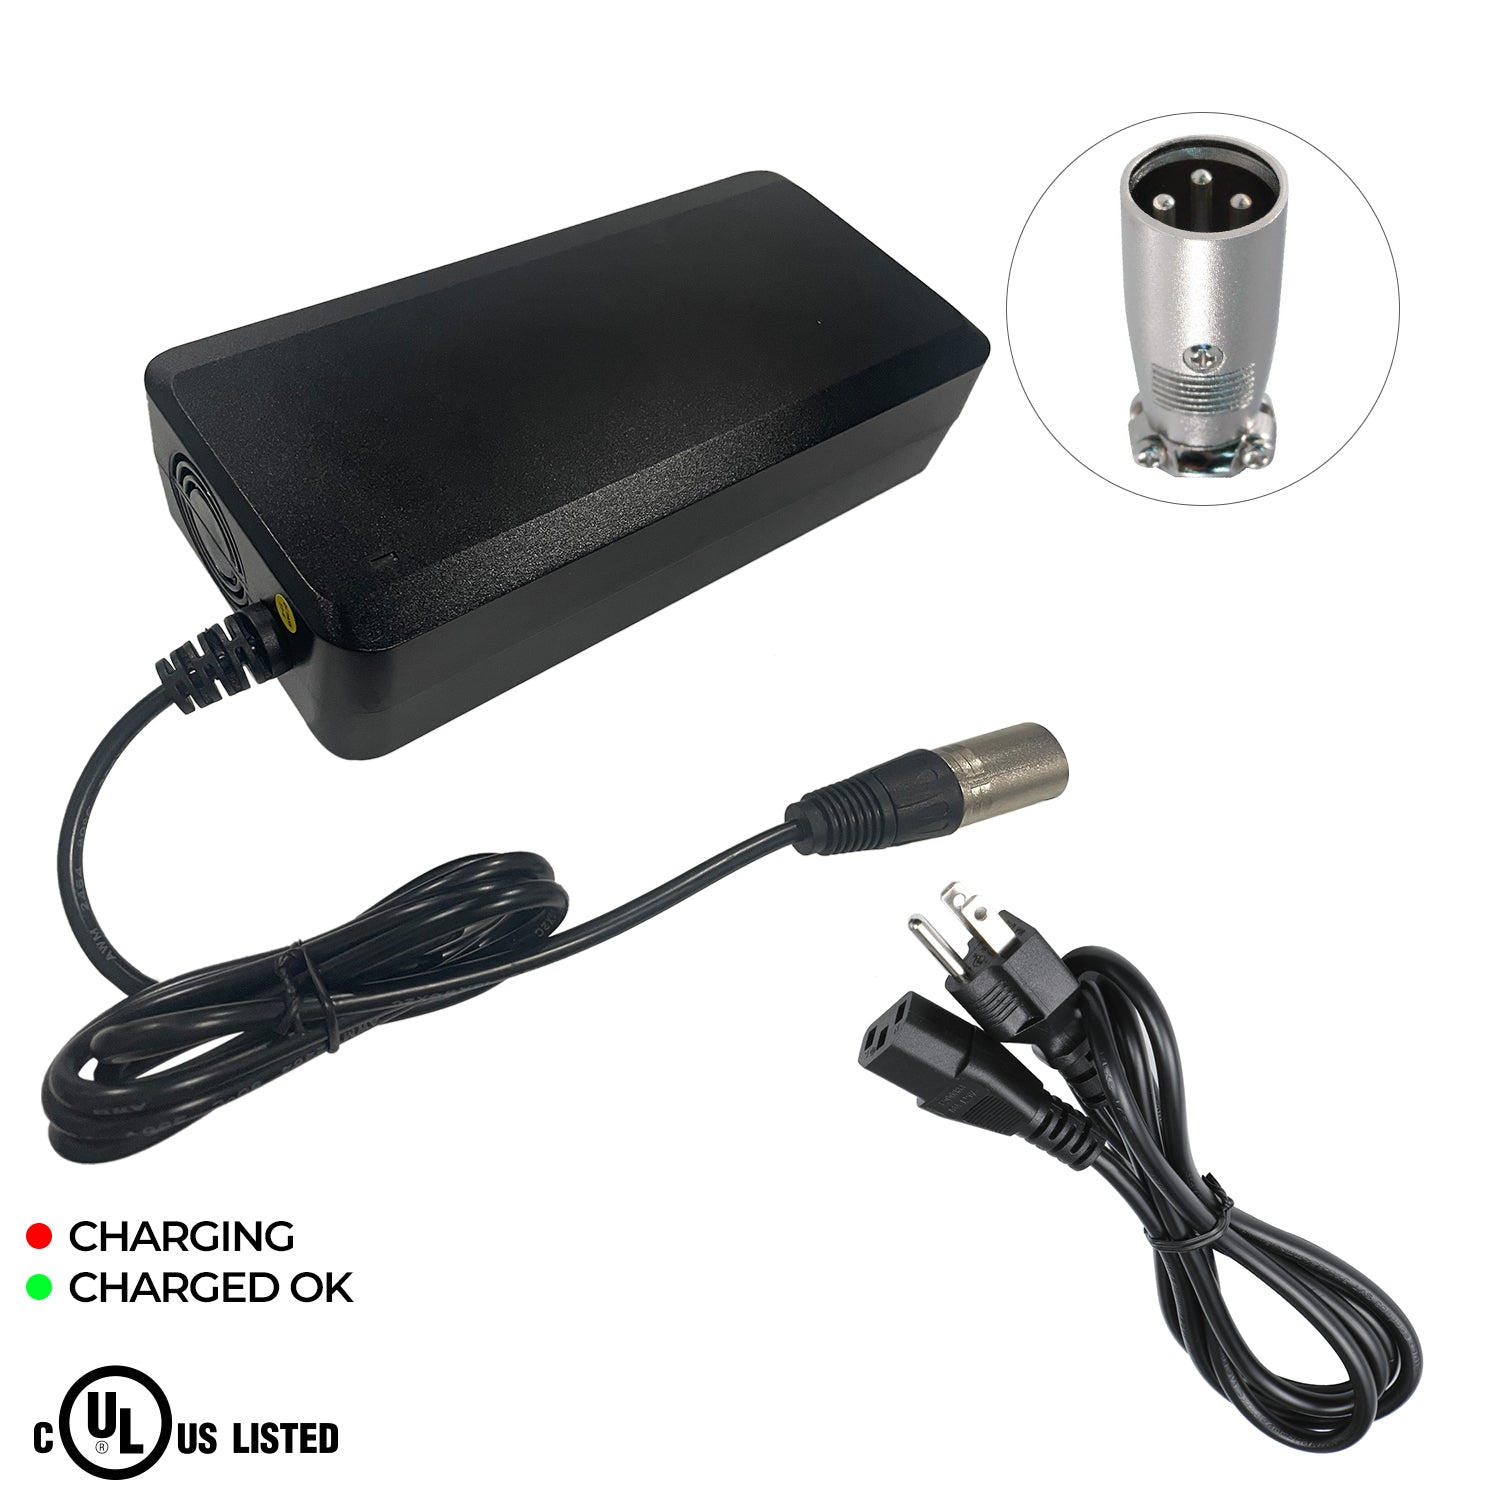 UL Listed 24V 8A Charger for Golden Patriot GR575 Power Chair